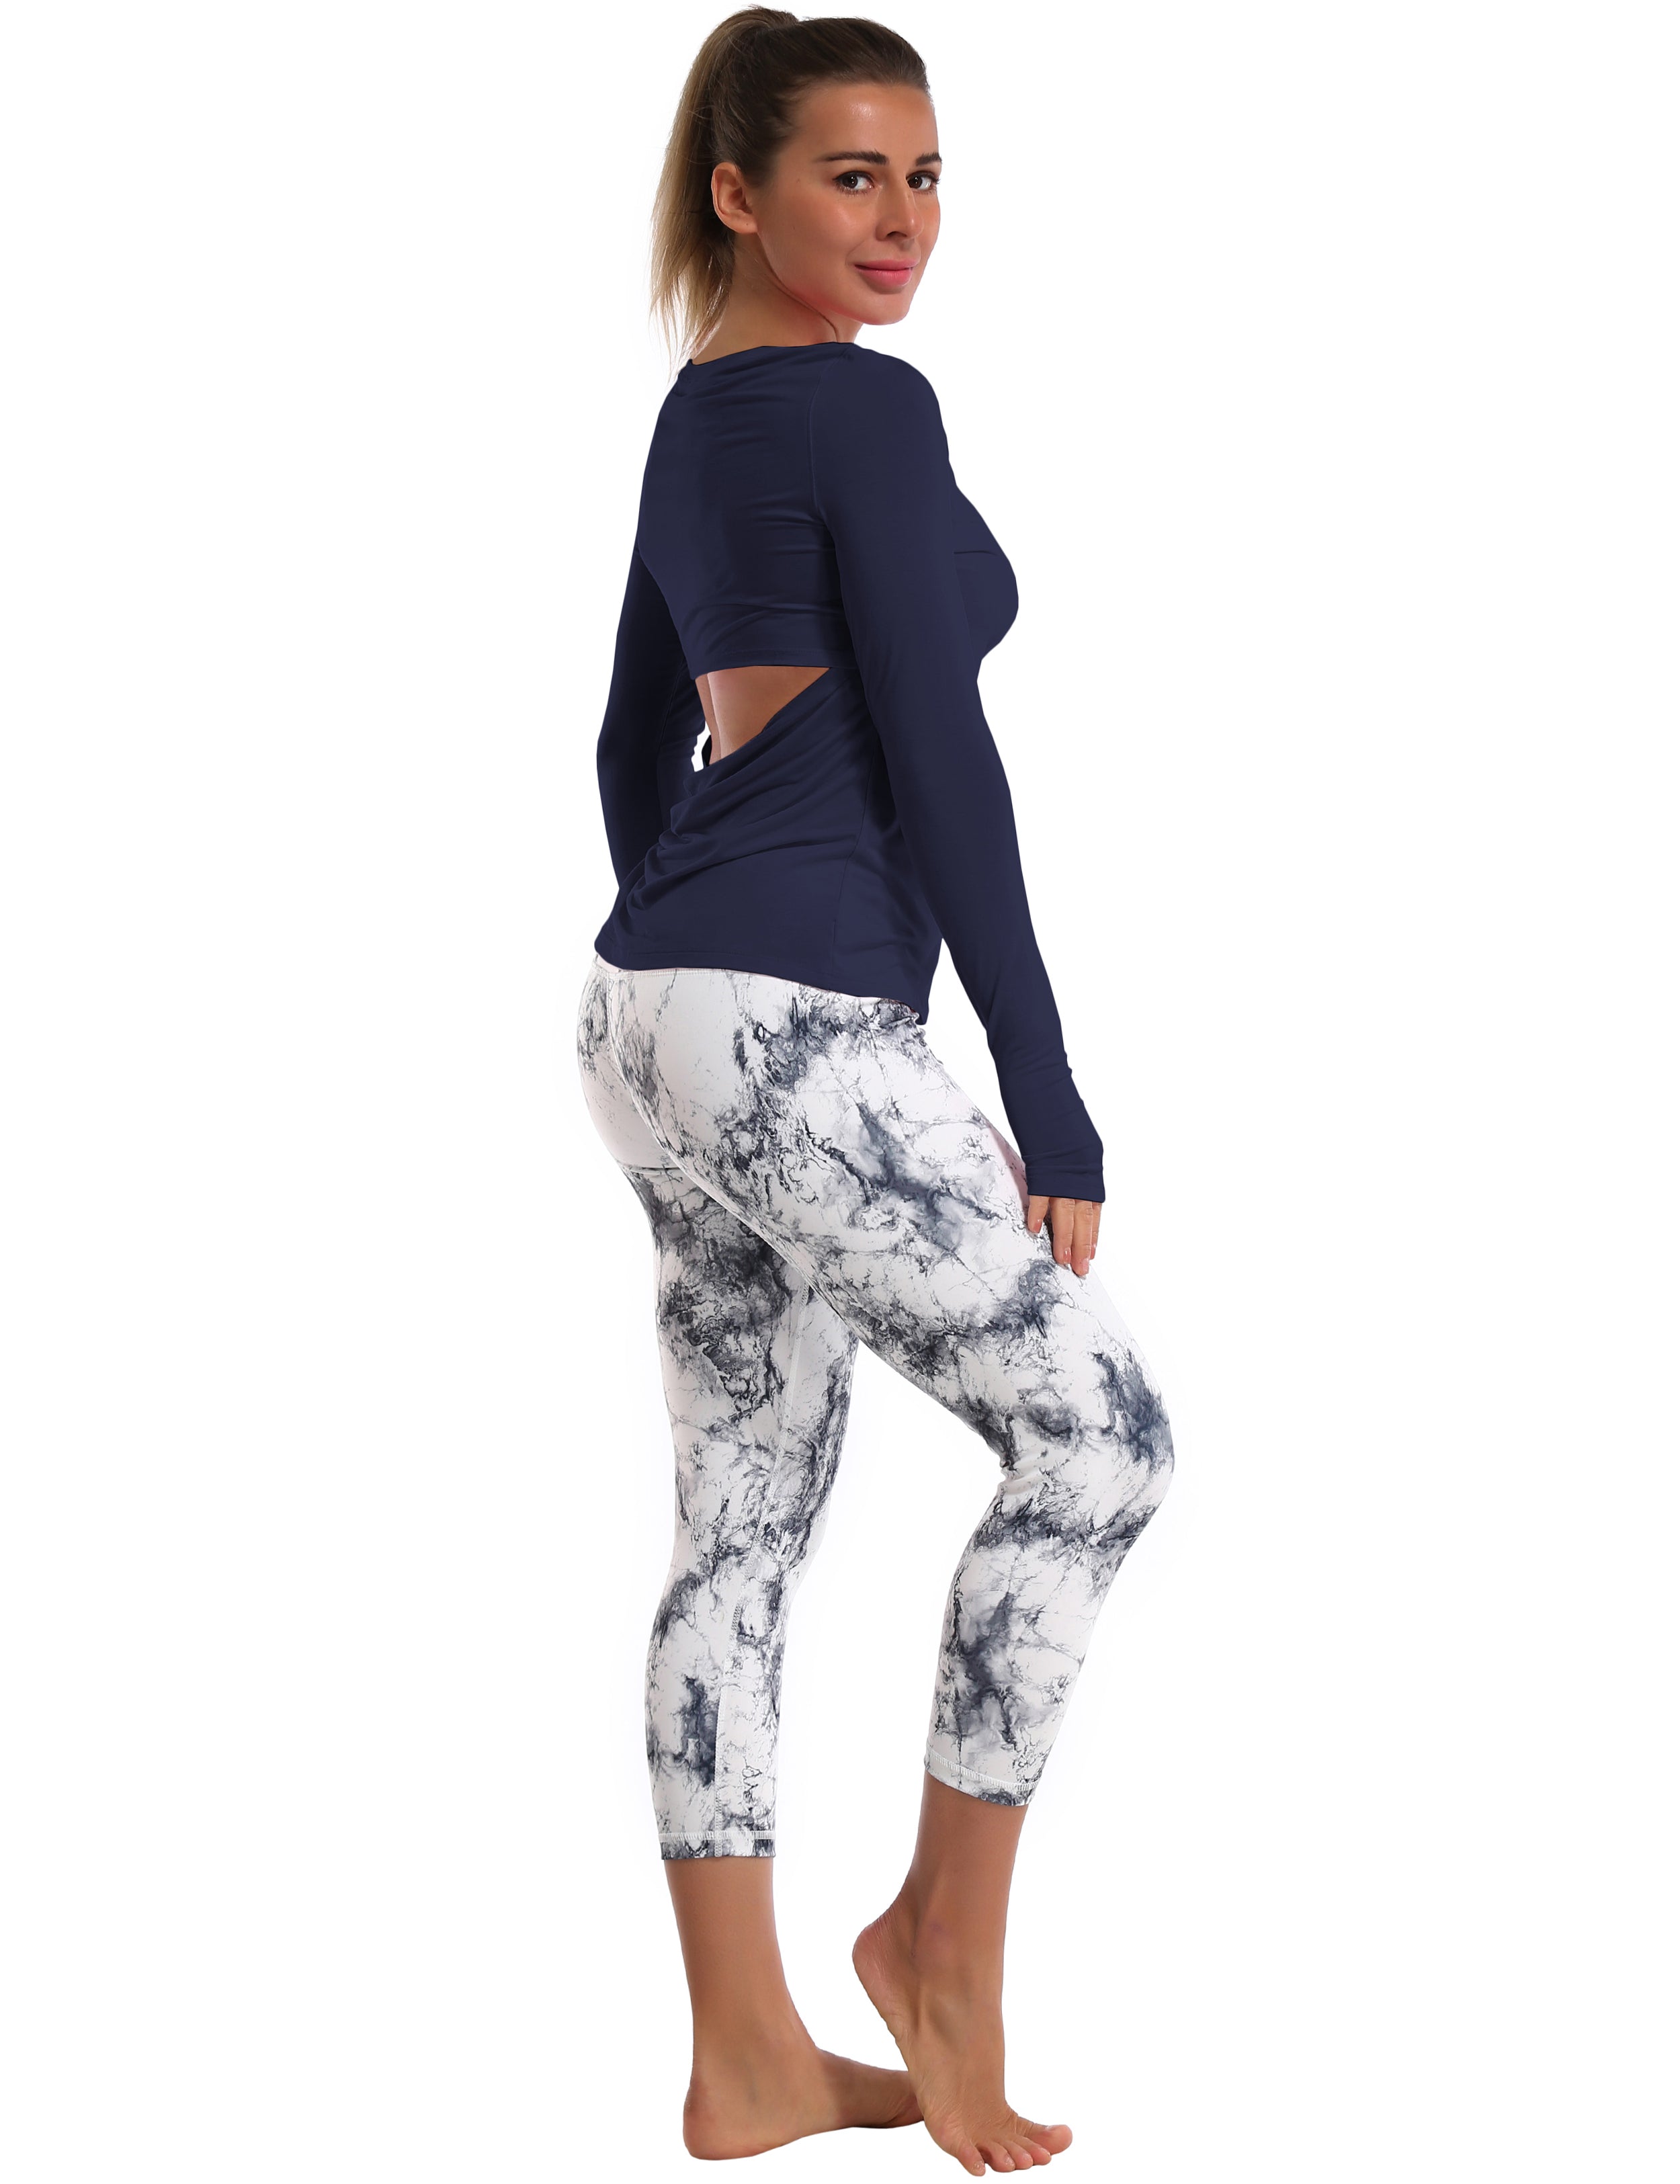 Open Back Long Sleeve Tops darknavy Designed for On the Move Slim fit 93%Modal/7%Spandex Four-way stretch Naturally breathable Super-Soft, Modal Fabric